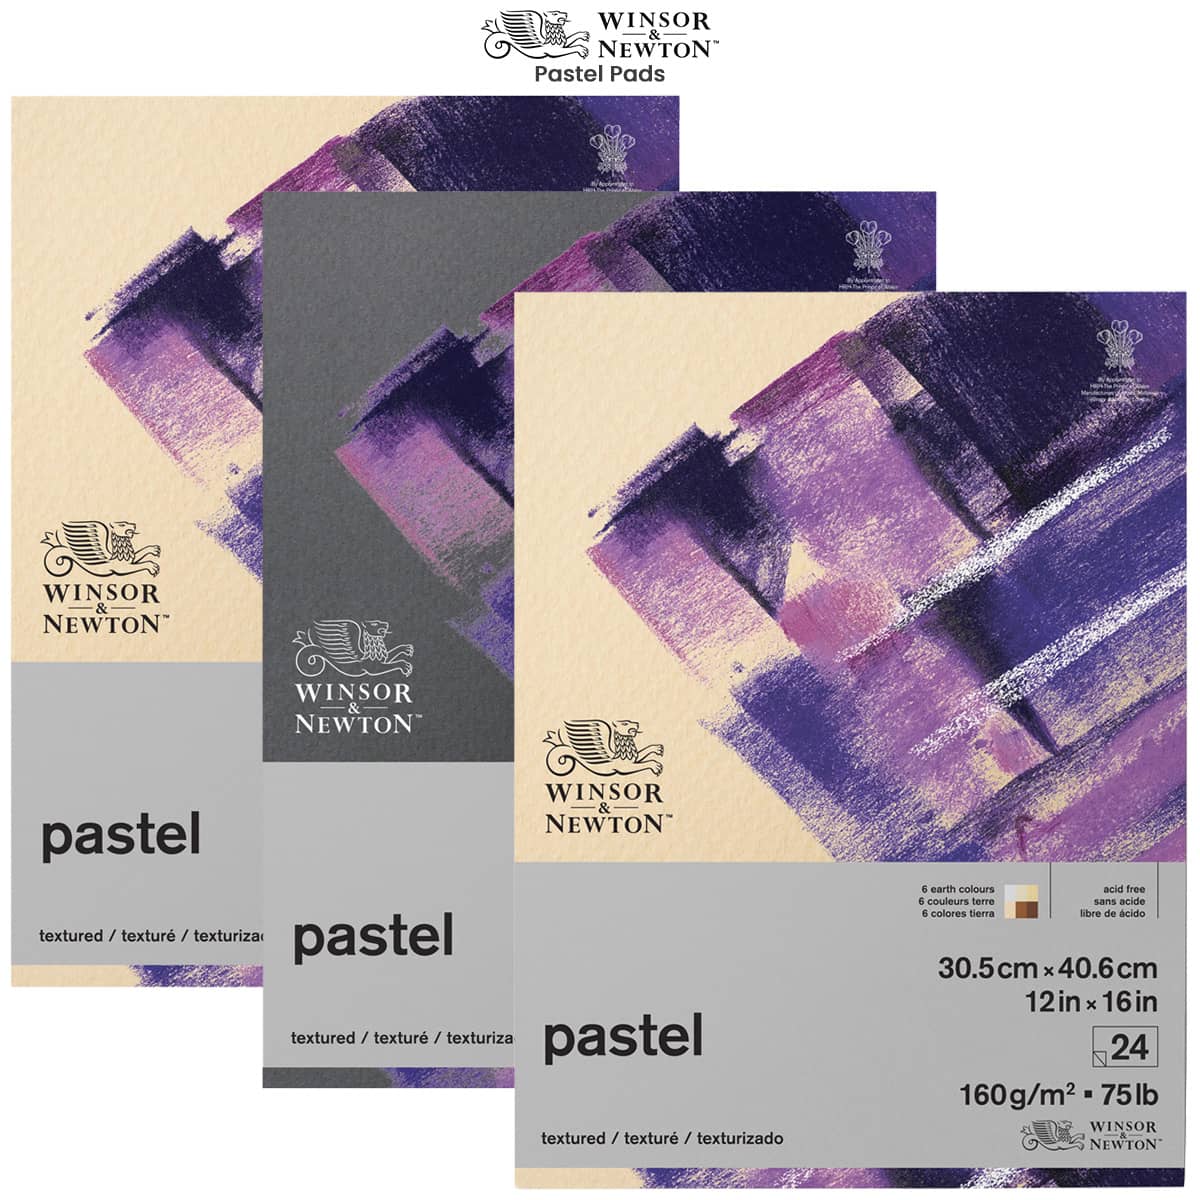 Art Spectrum Colourfix Smooth Pastel Papers